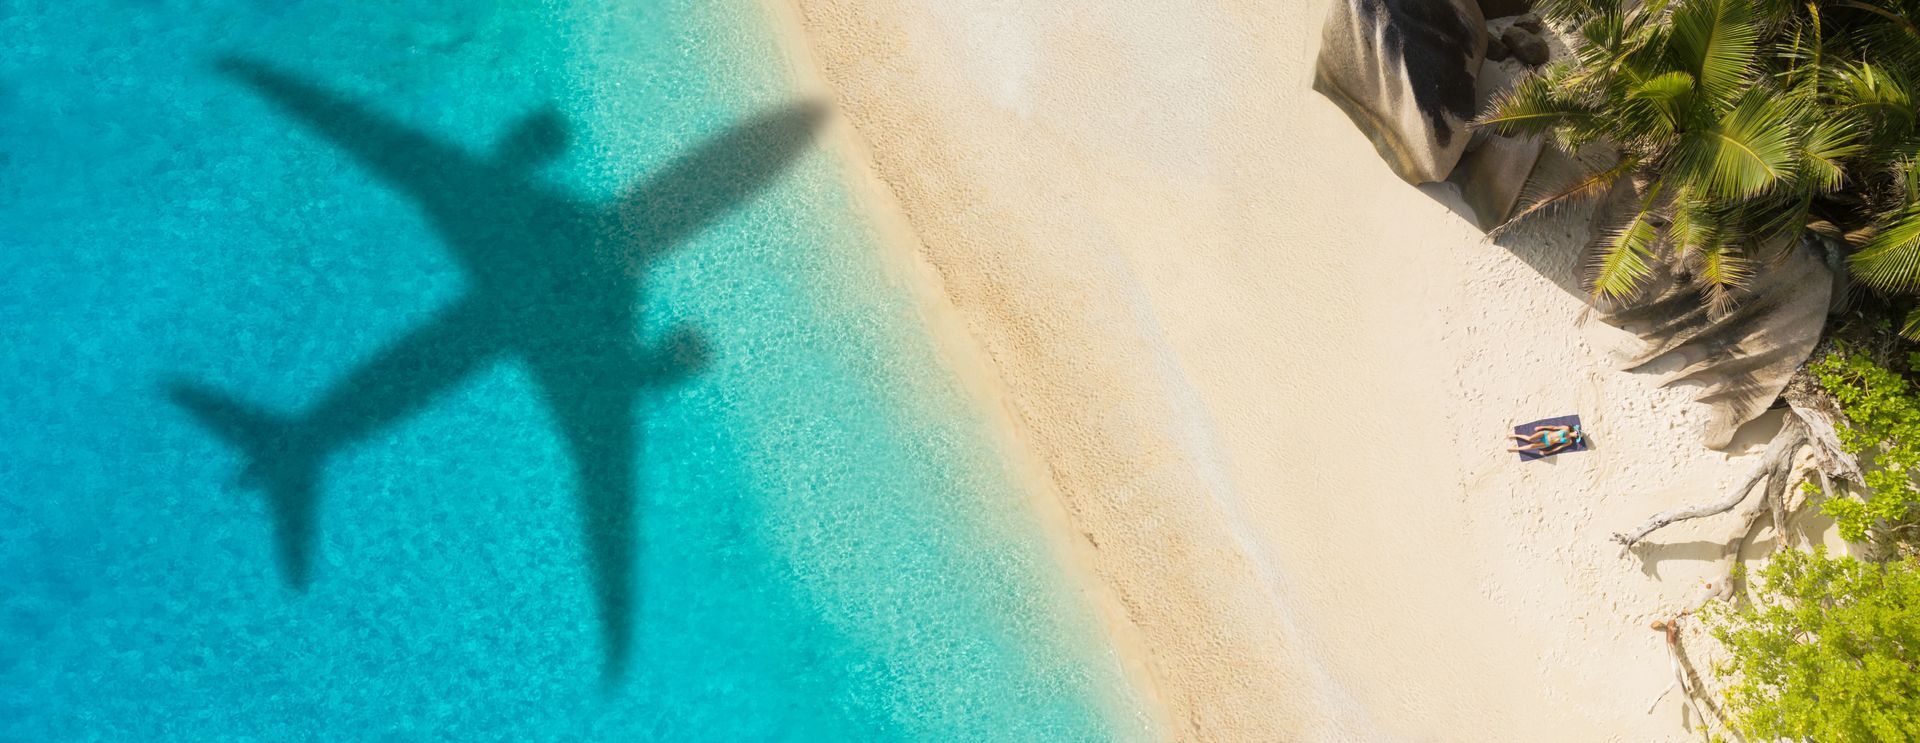 A plane is casting a shadow on a beach.